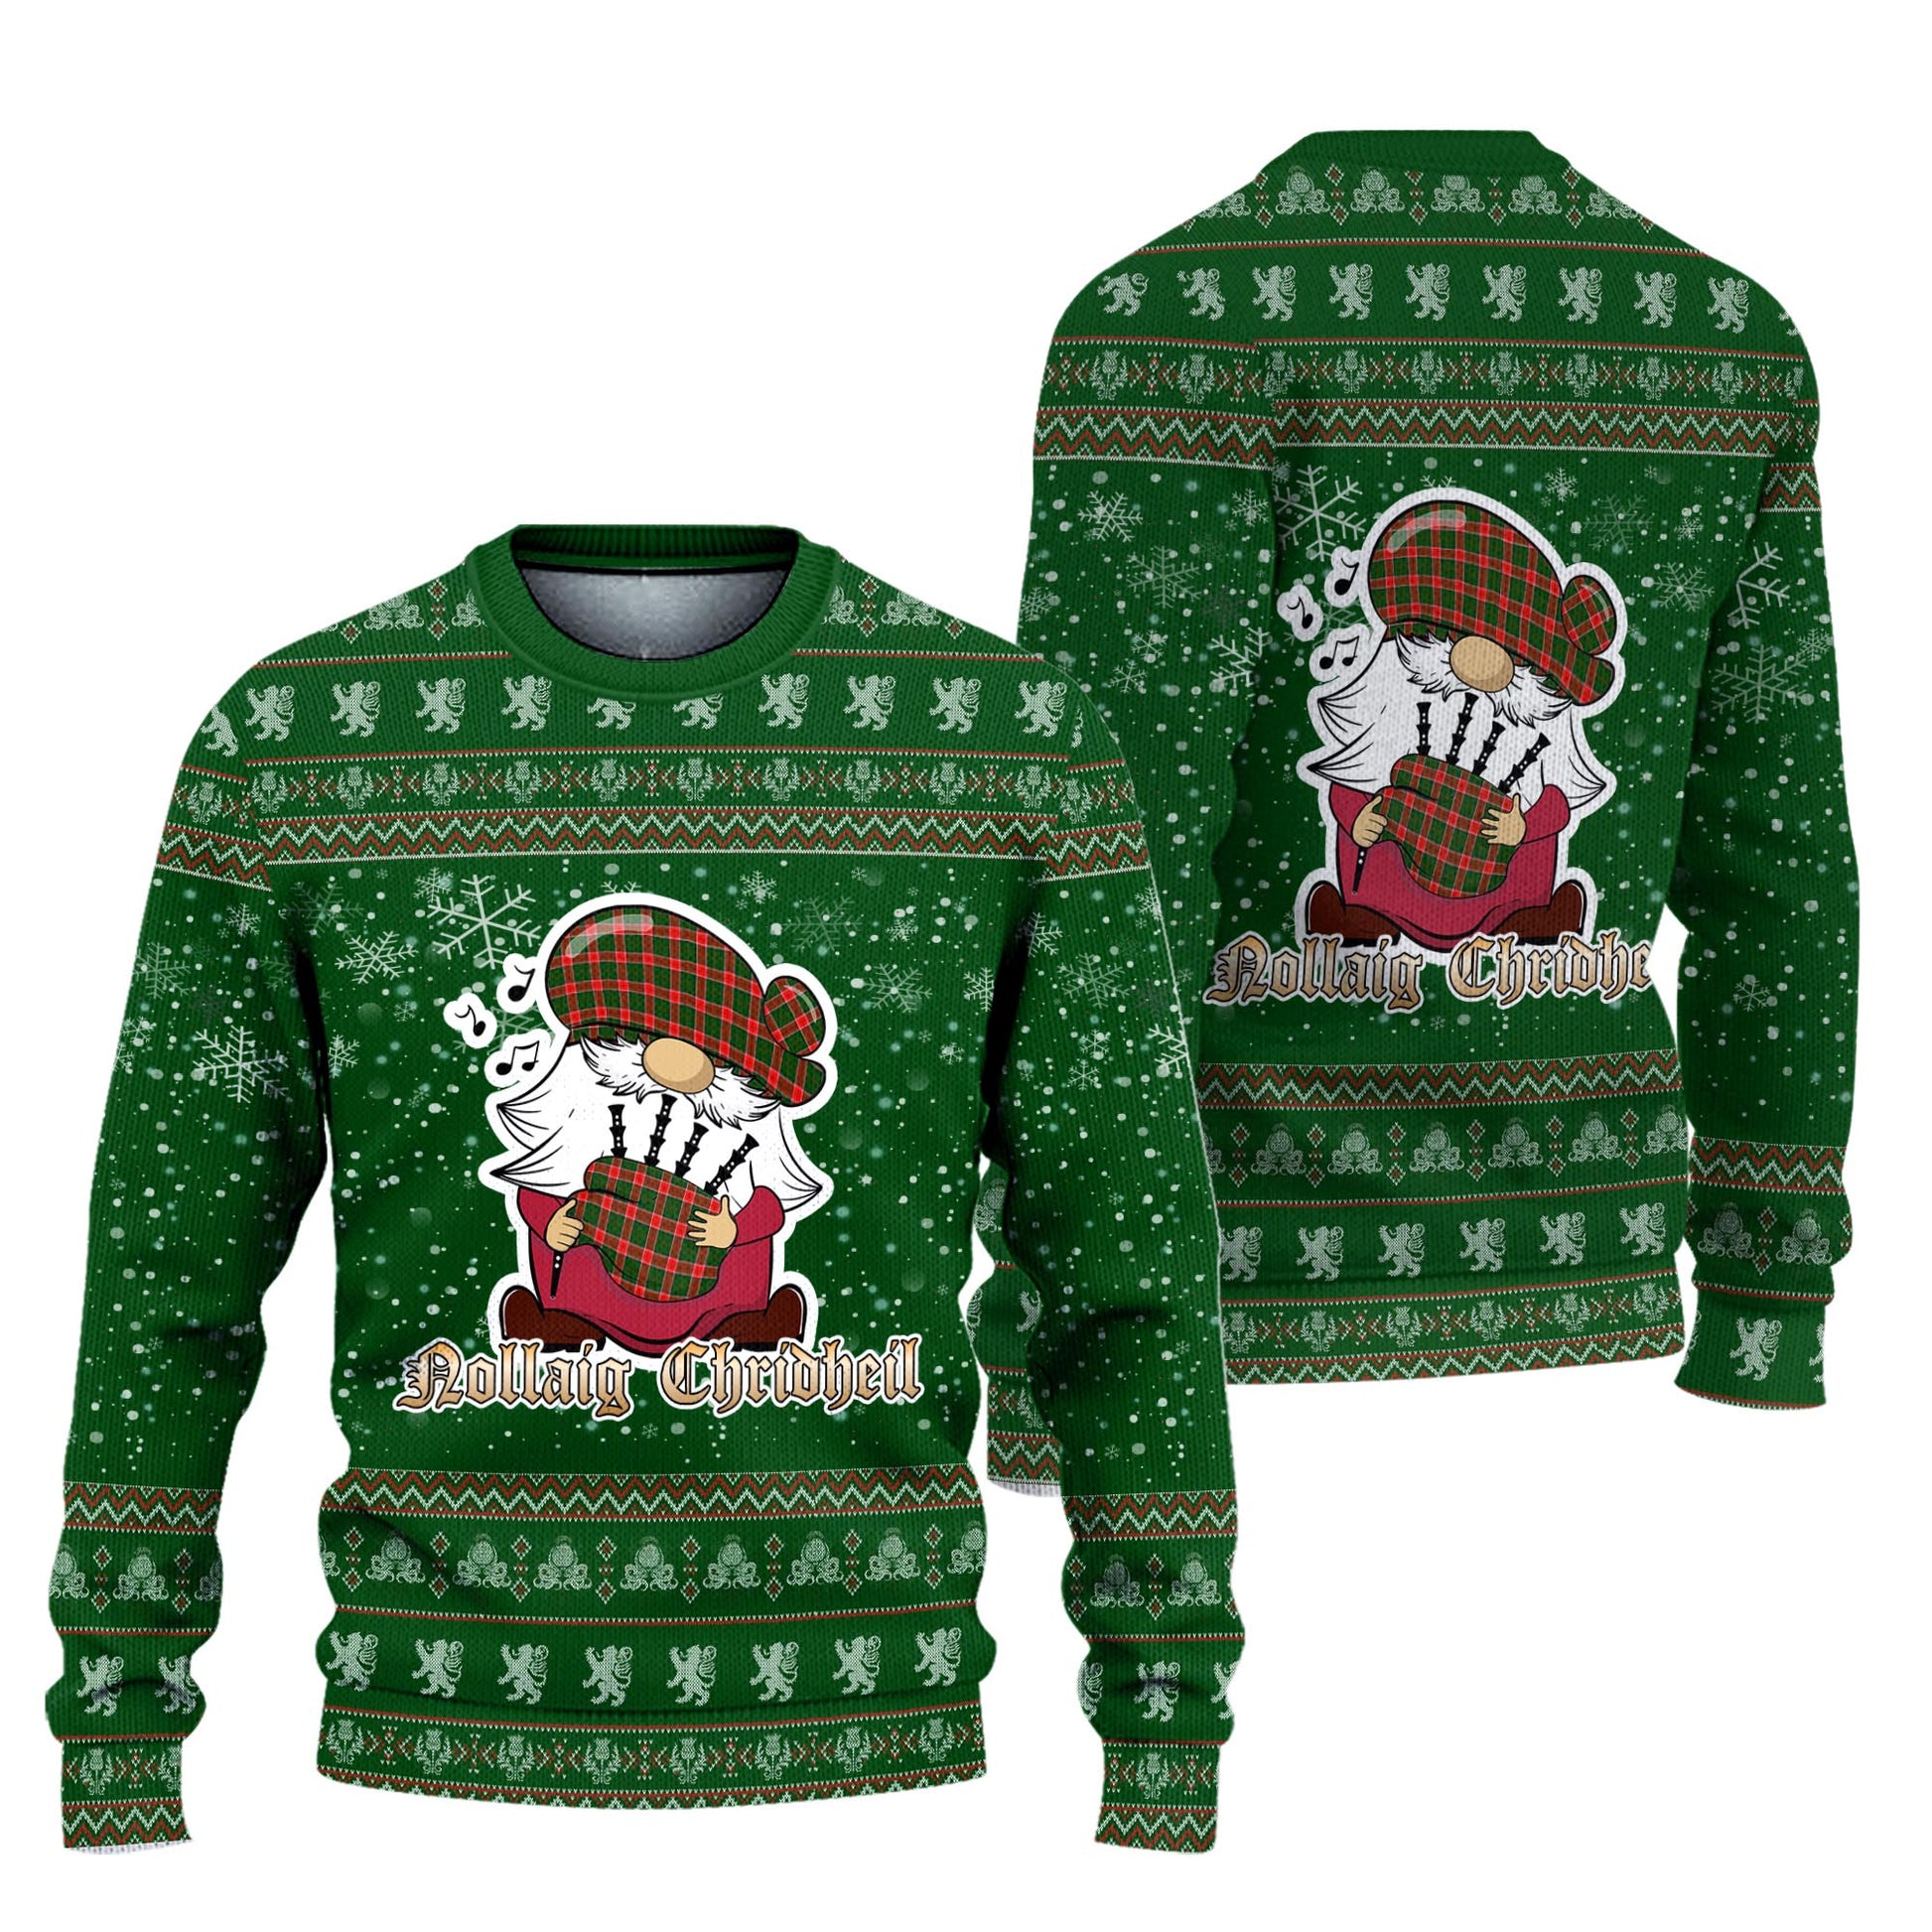 Pollock Modern Clan Christmas Family Knitted Sweater with Funny Gnome Playing Bagpipes Unisex Green - Tartanvibesclothing